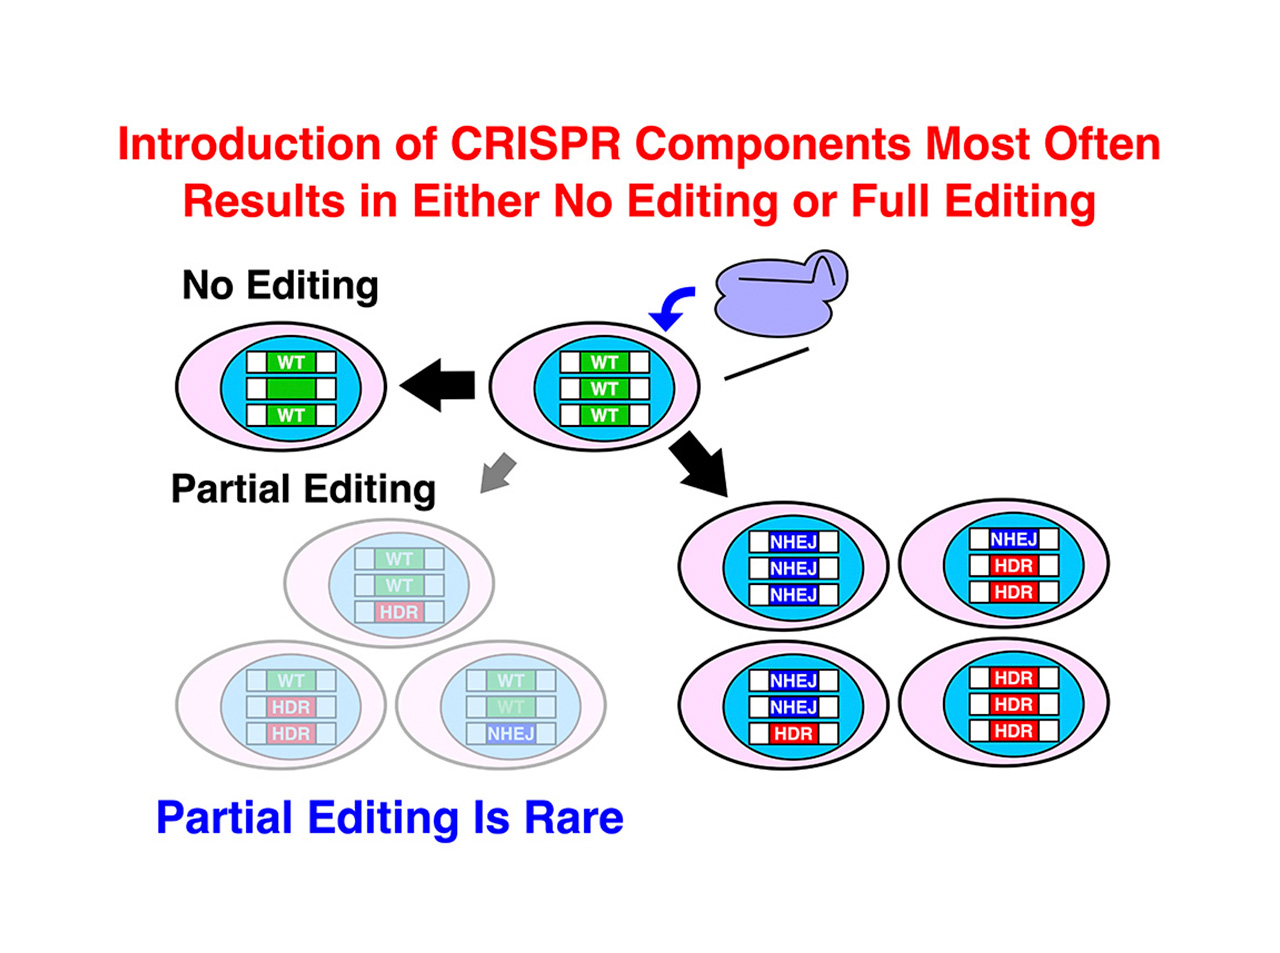 Genome Editing Is Induced in a Binary Manner in Single Human Cells